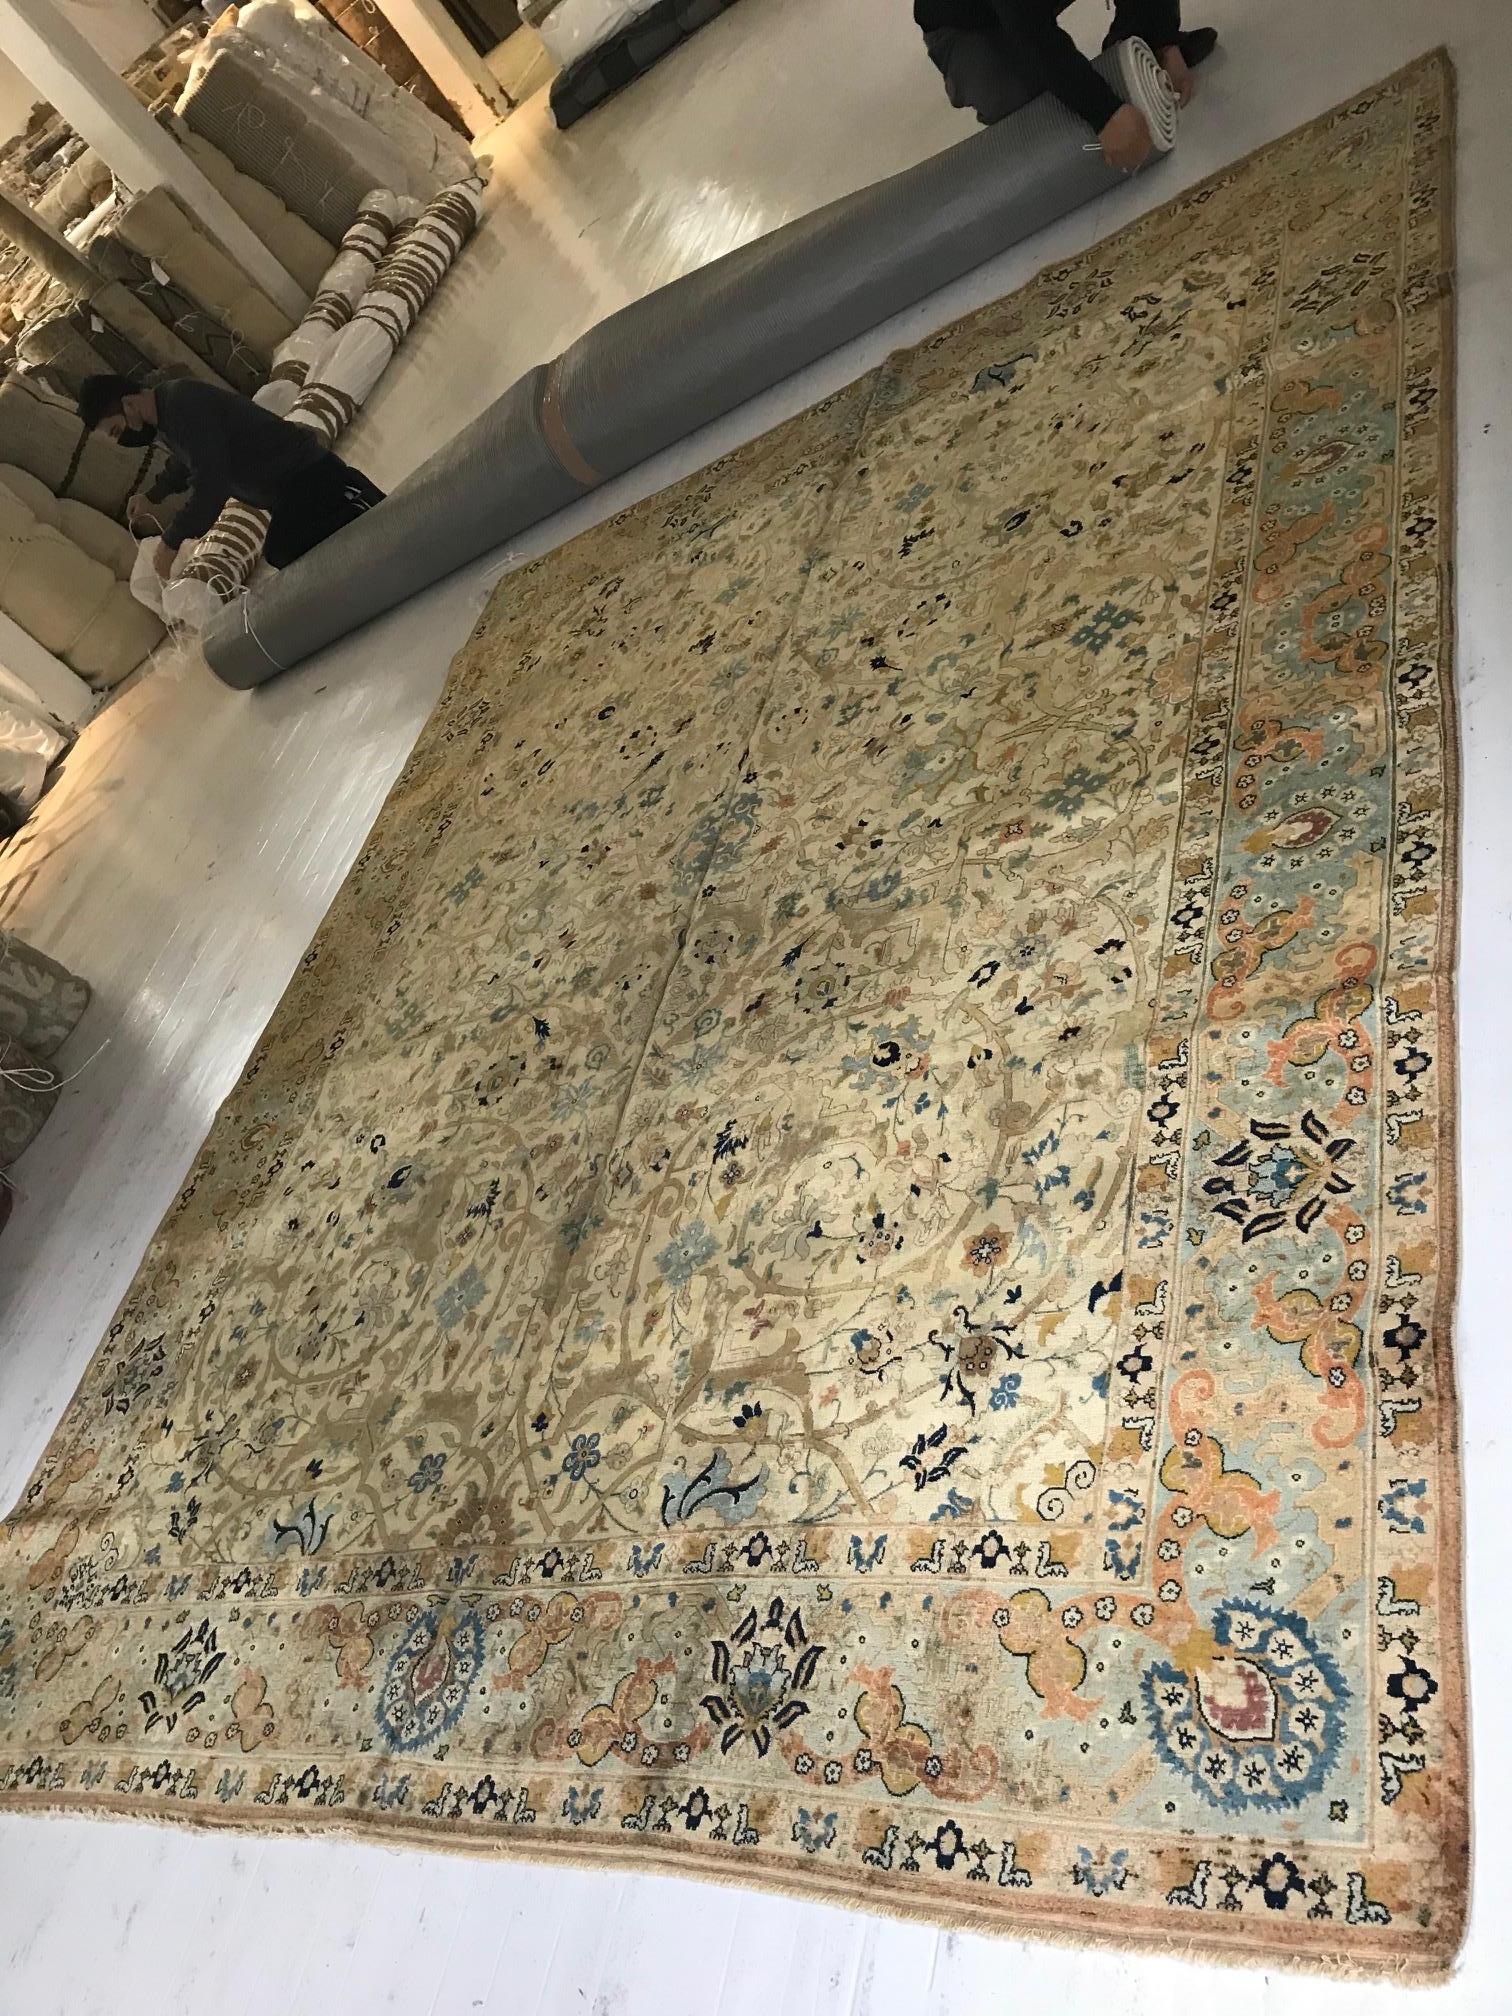 Antique Persian Tabriz Botanic Handwoven Wool Rug In Good Condition For Sale In New York, NY